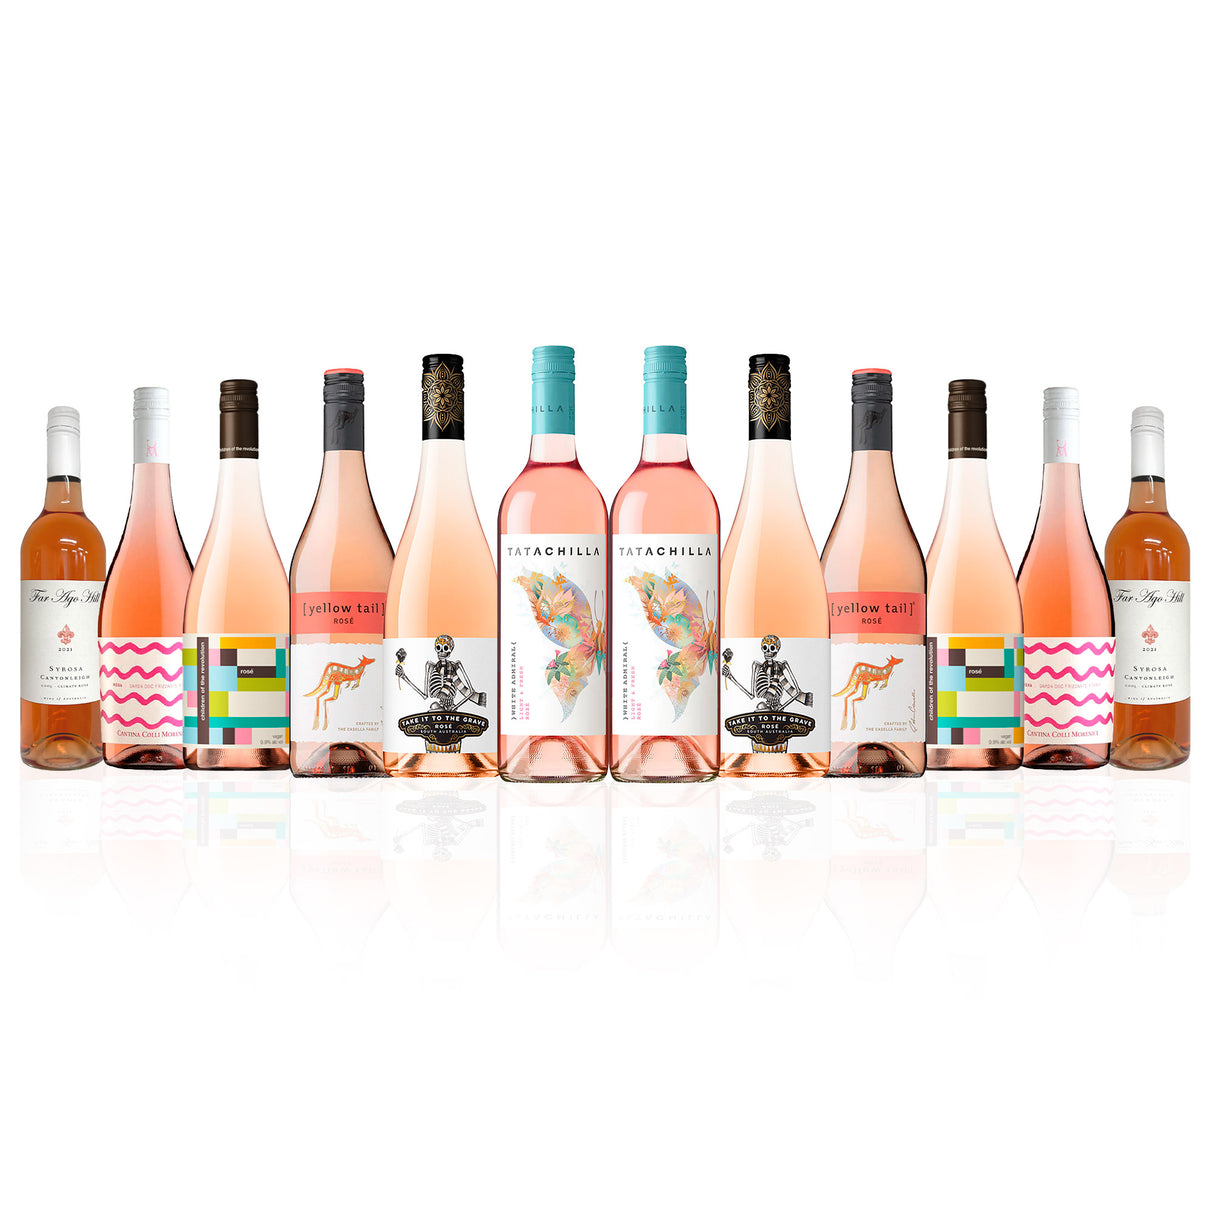 All The Way Rose Mix 1.0 (12 Bottles)